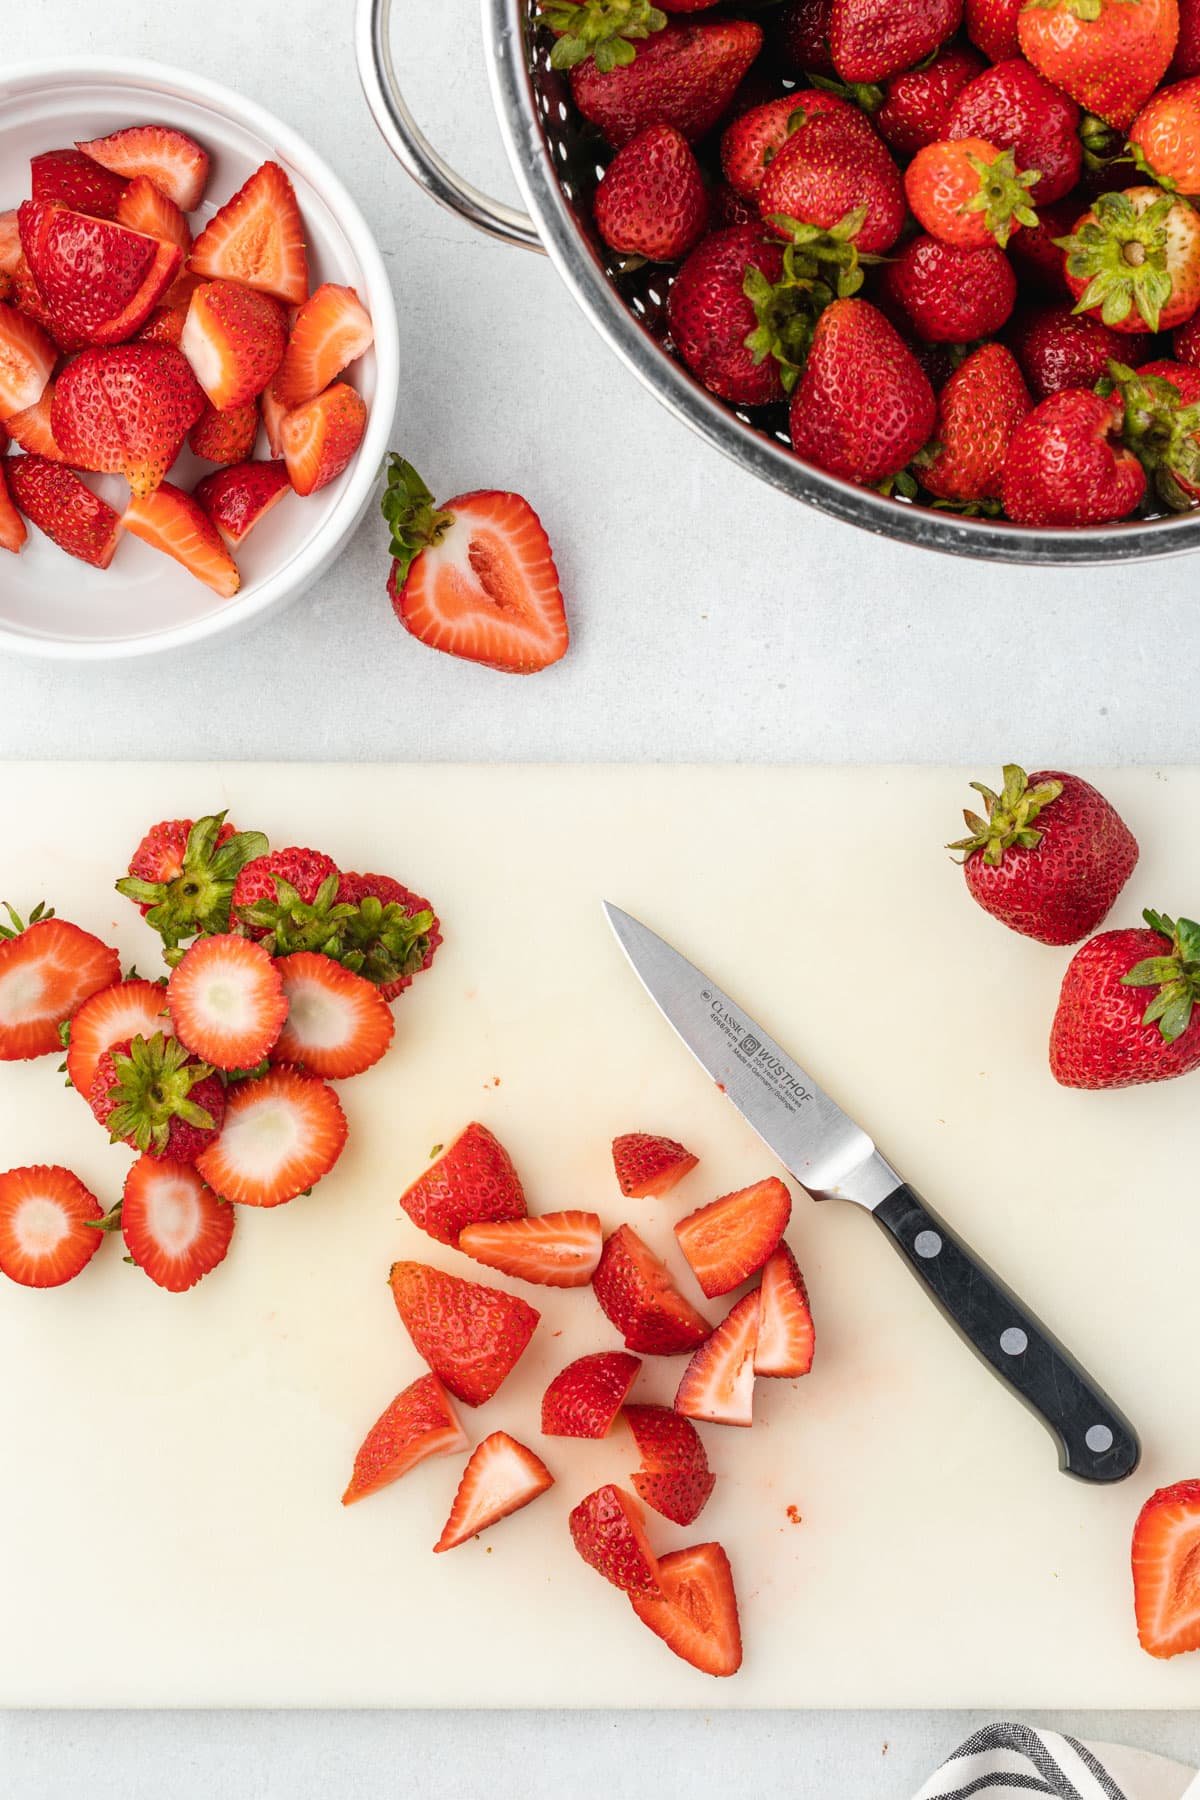 Curring board with a few whole strawberries on the right, sliced strawberries with a pairing knife in the middle, and the cut tops on the left.